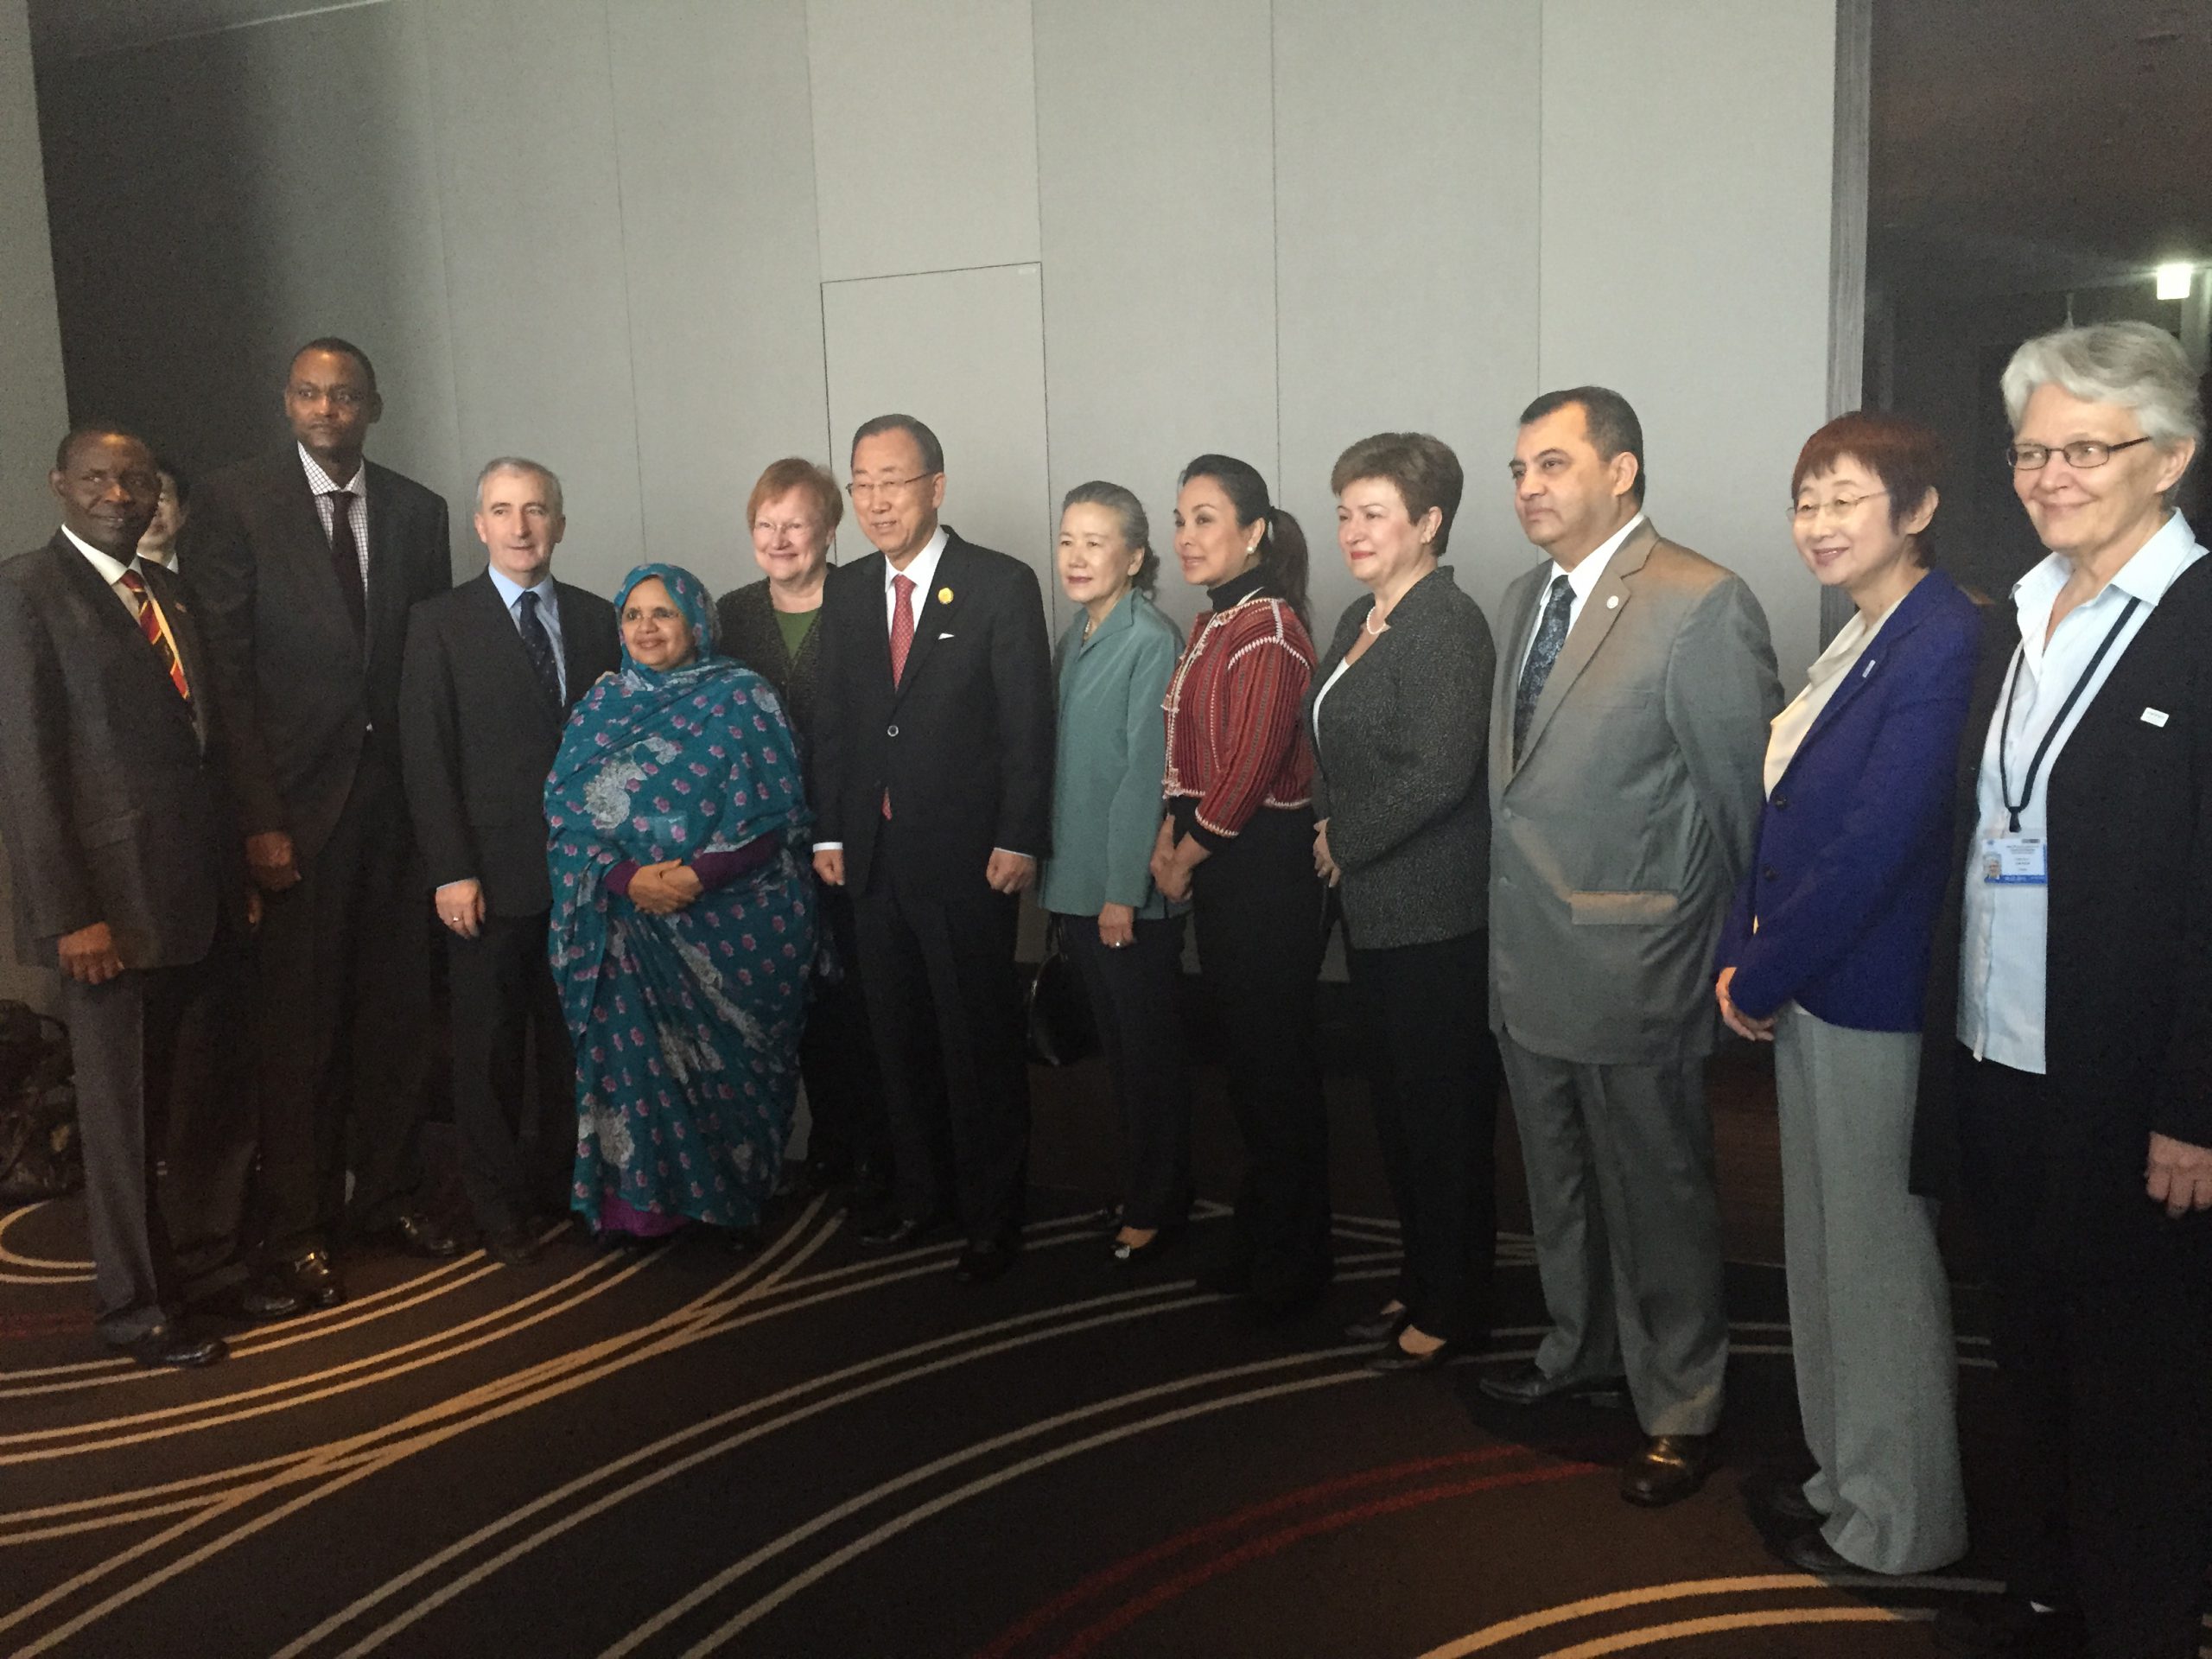 Special Meeting among DRR Champions with the UN Secretary-General Ban Ki-Moon